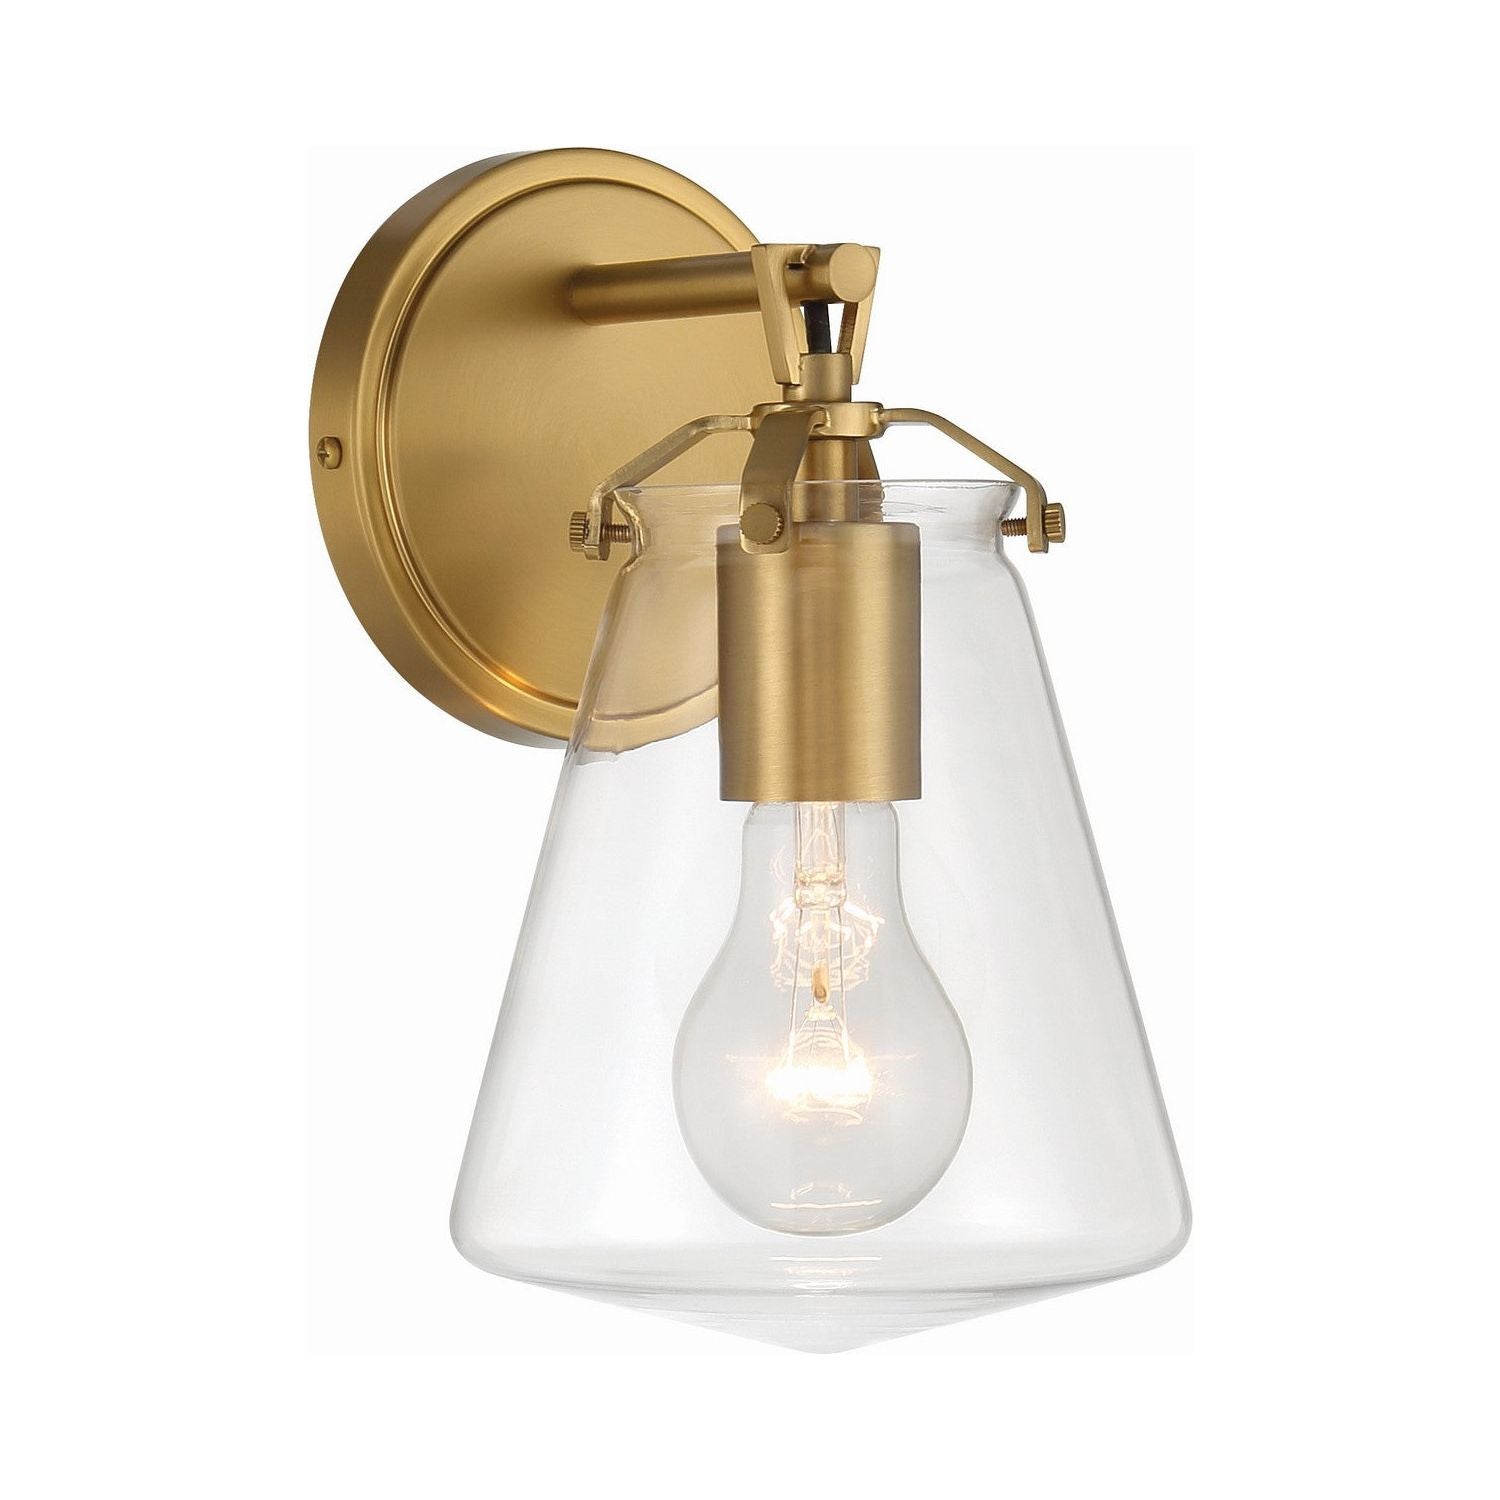 Crystorama - VSS-7001-LG - One Light Wall Sconce - Voss - Luxe Gold